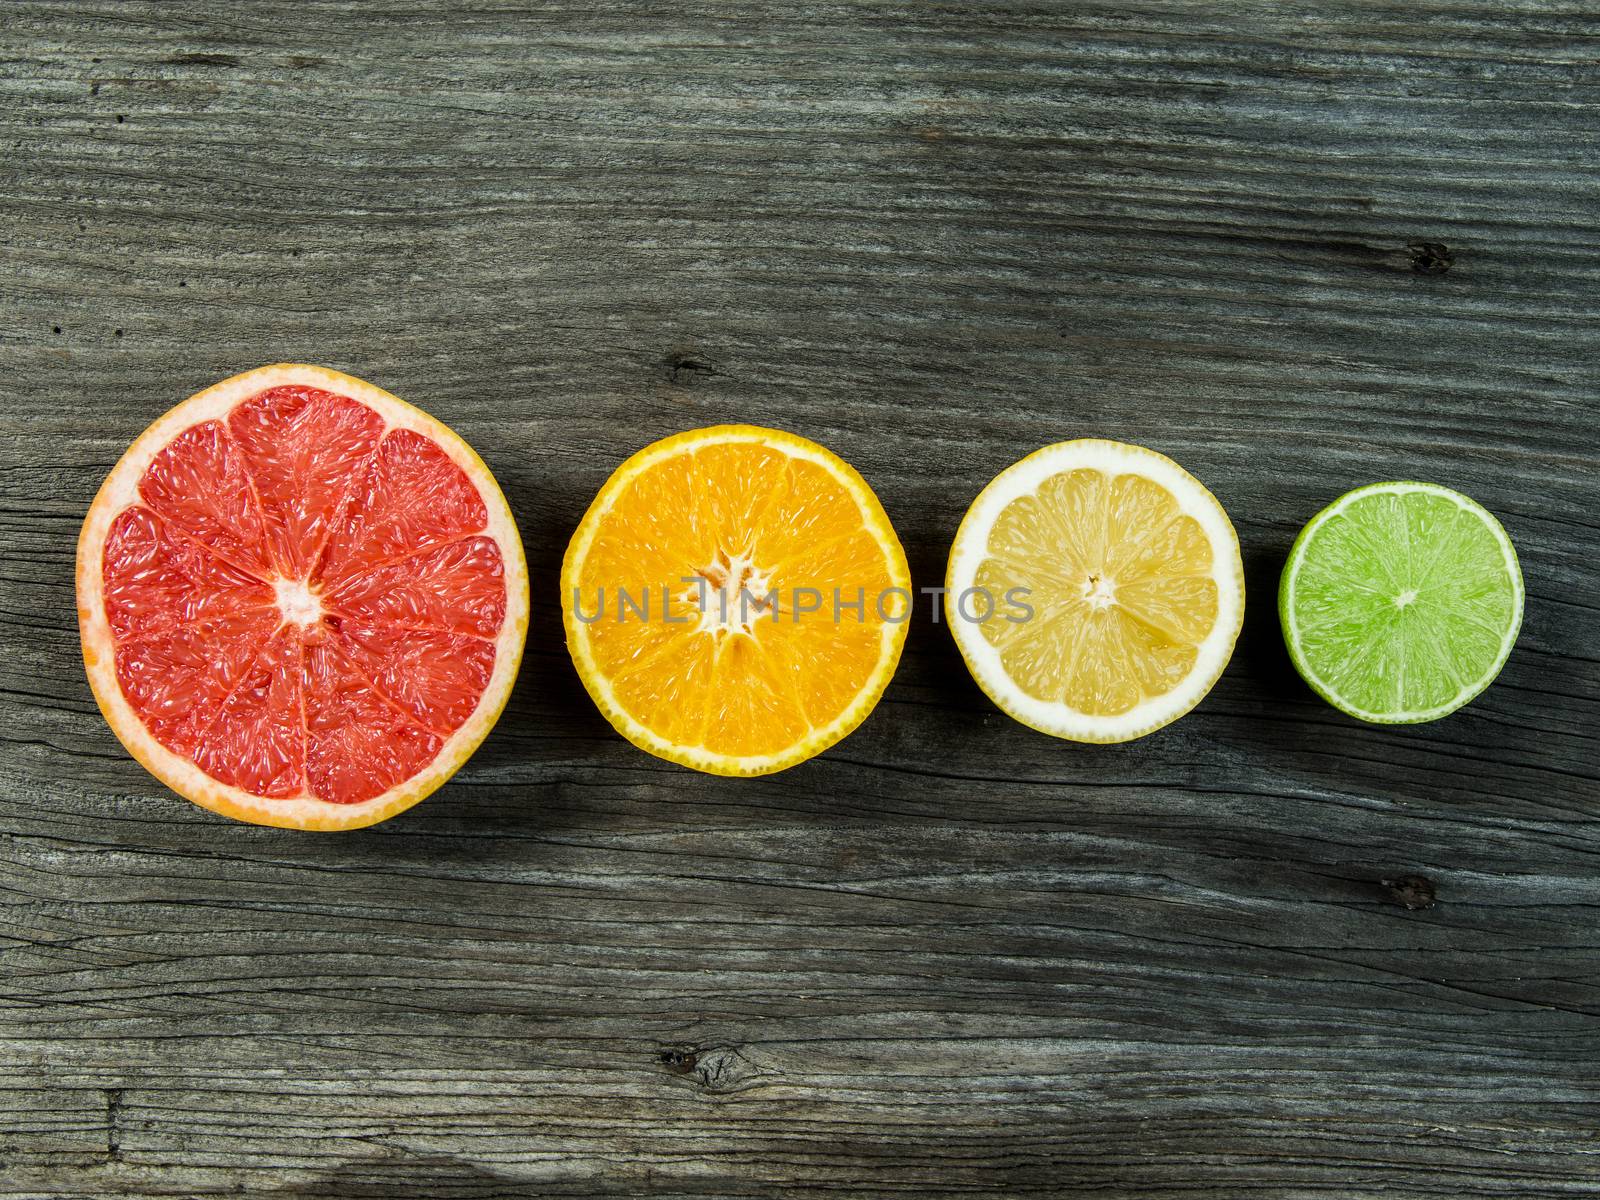 Fruit on wood background in a row by sumners